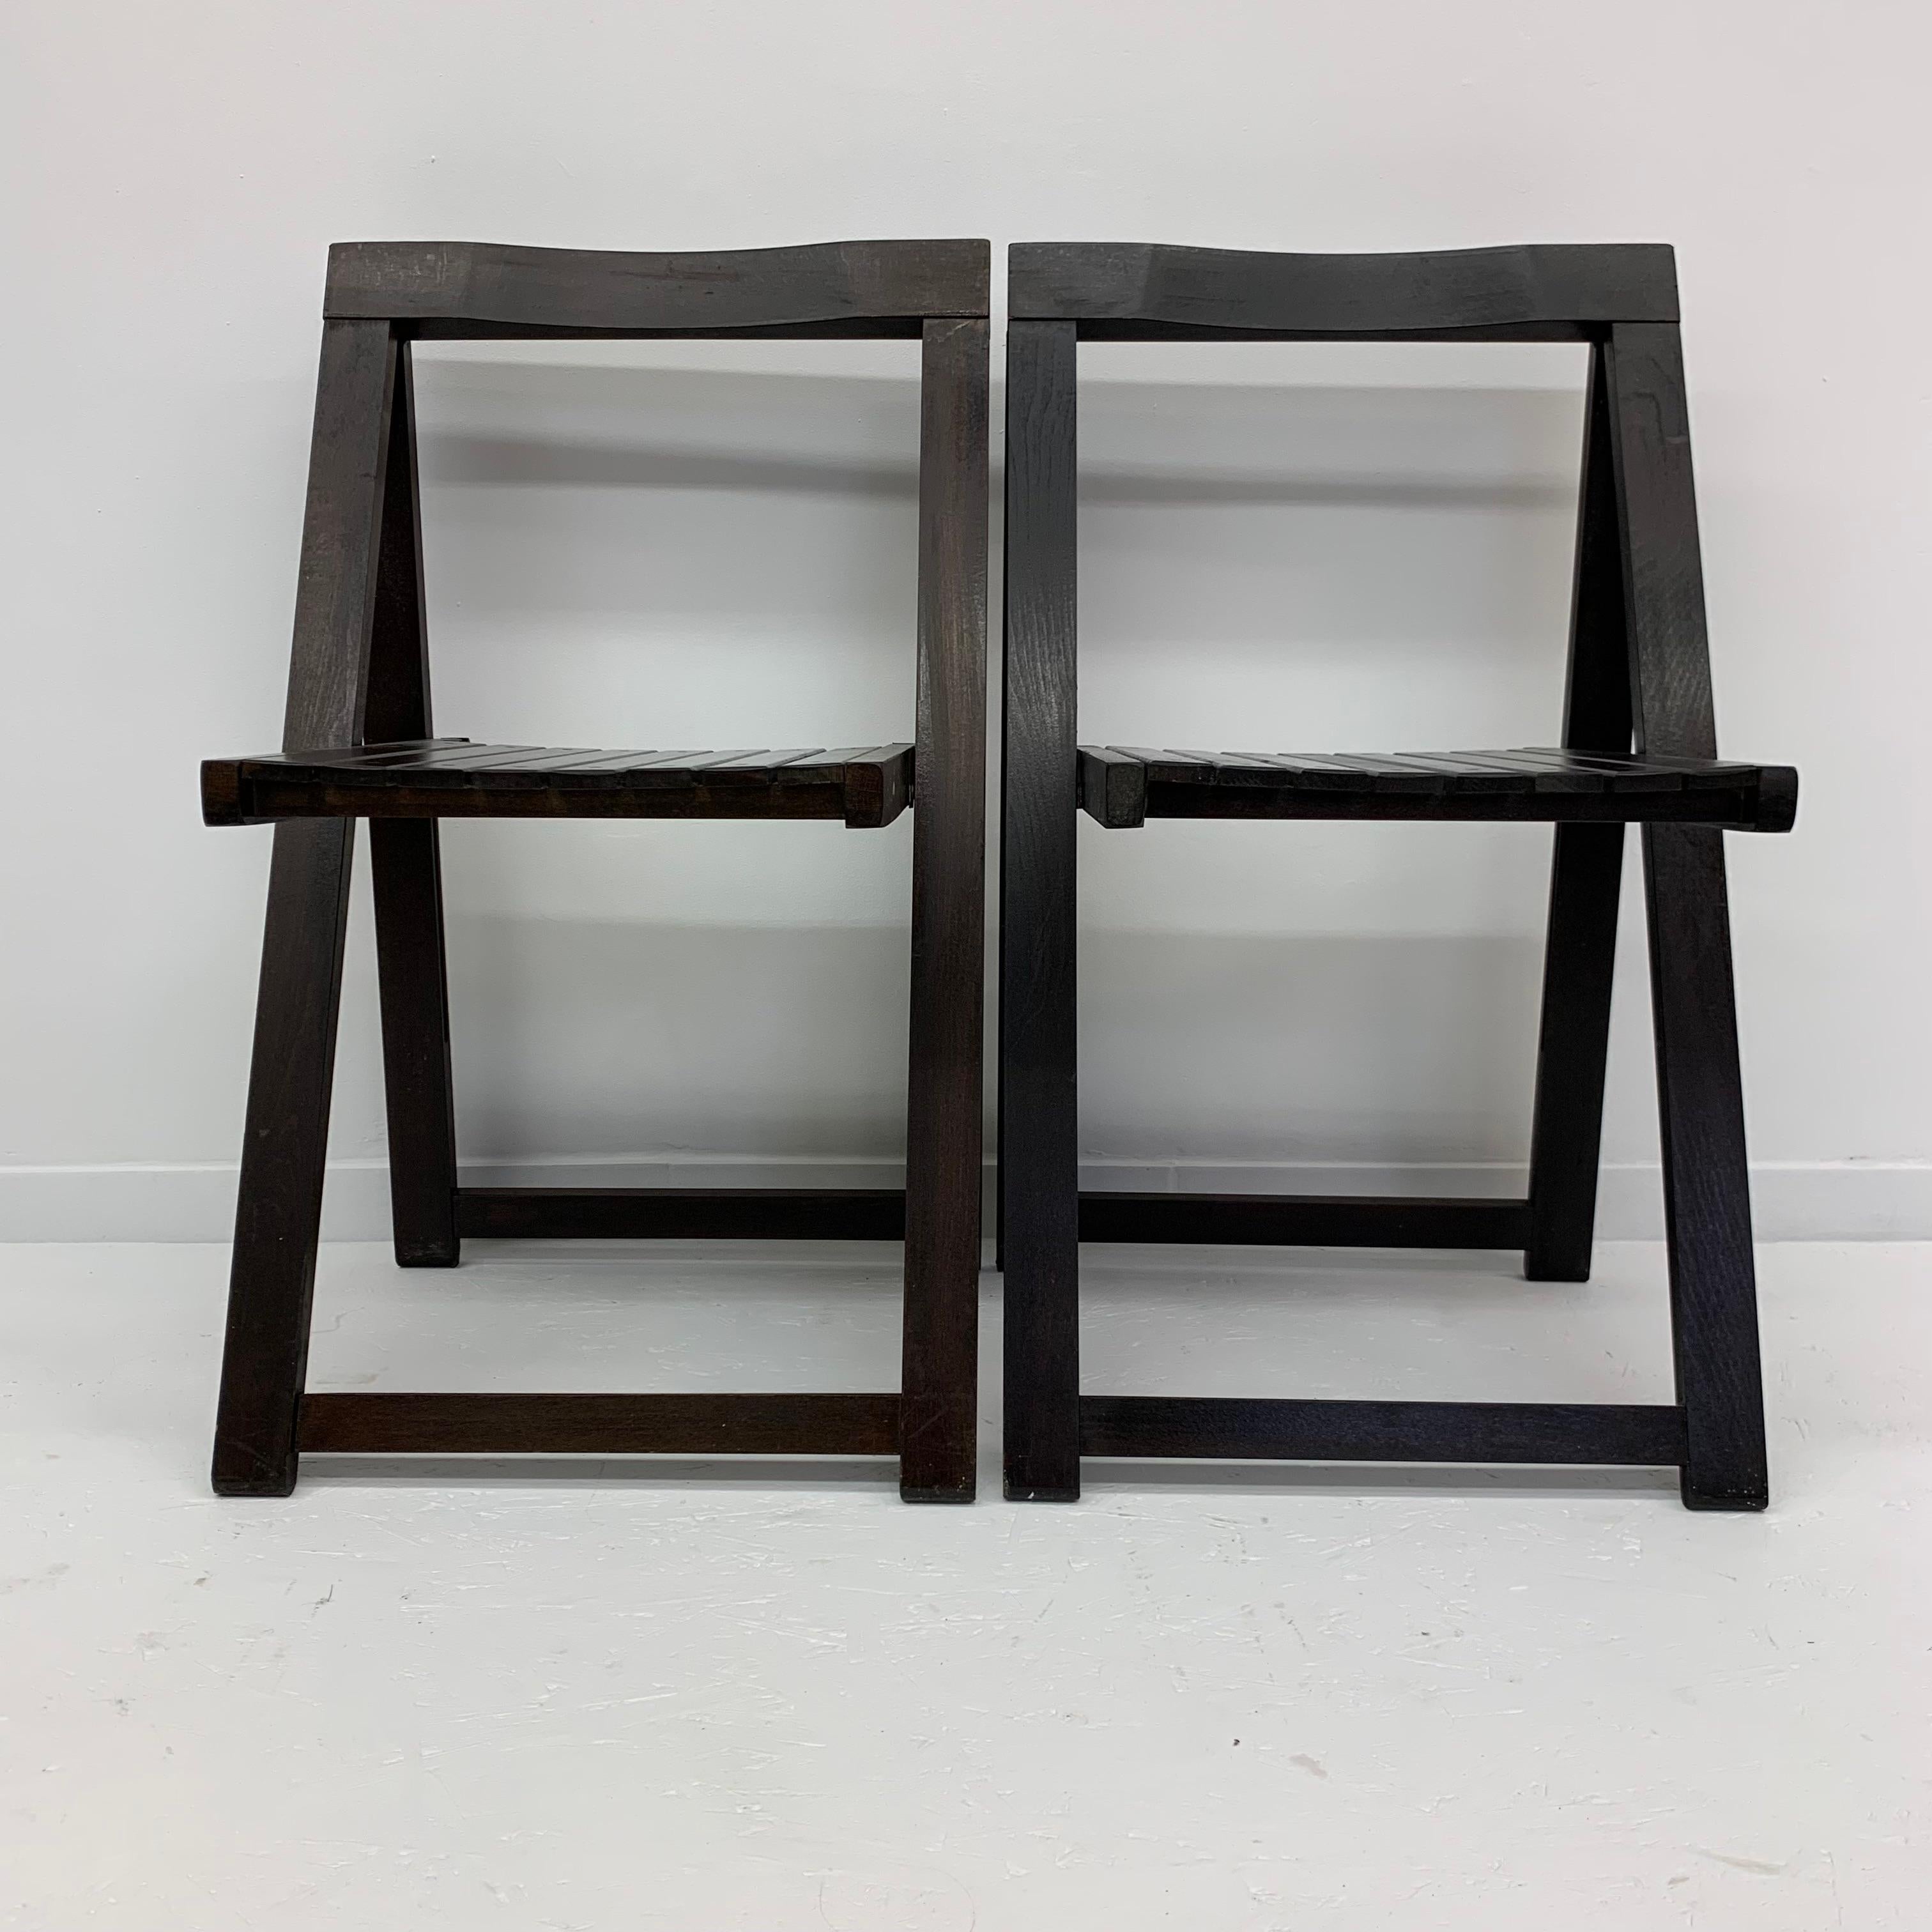 Set of 2 Aldo Jacober for Alberto Bazzani wooden folding chairs, 1960’s In Good Condition For Sale In Delft, NL